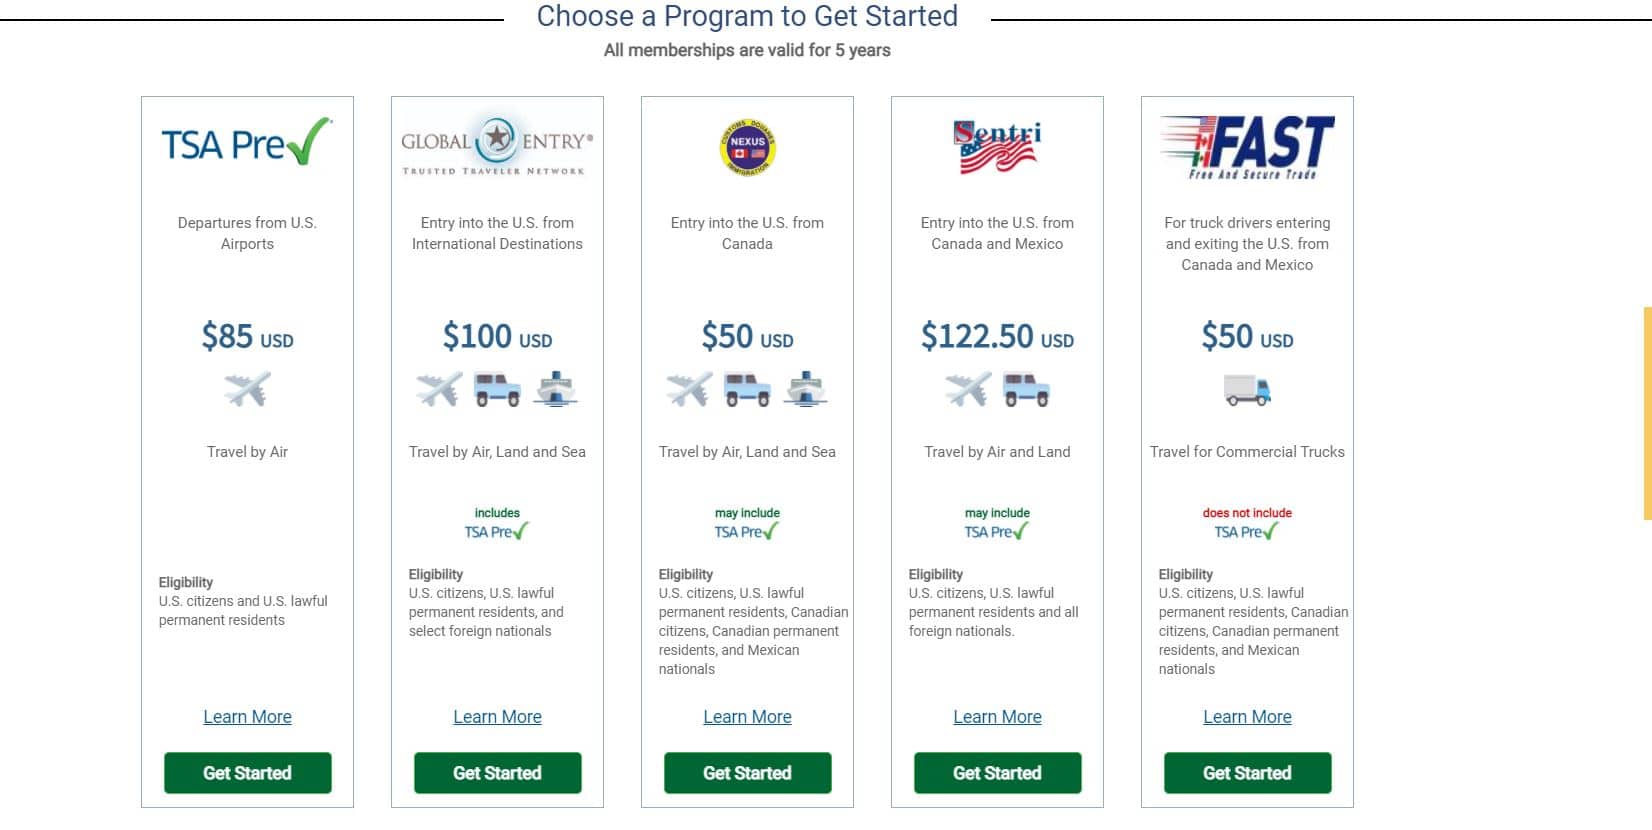 A picture compaing costs of trusted traveler programs and benefits